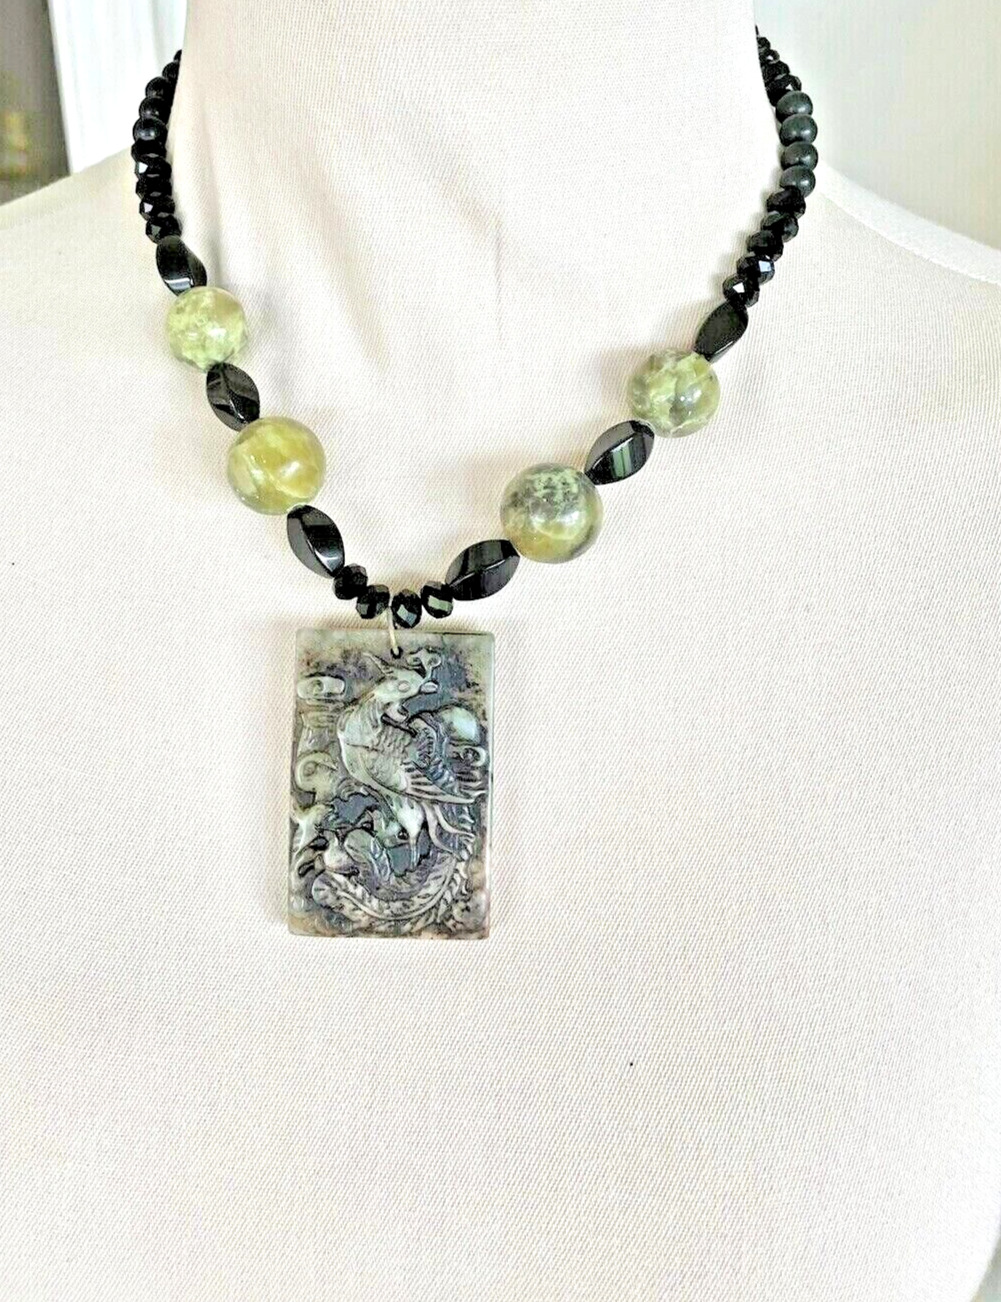 Jade/ Jadeite Necklace with Peacock Pendant Chinese Characters Handmade EUC